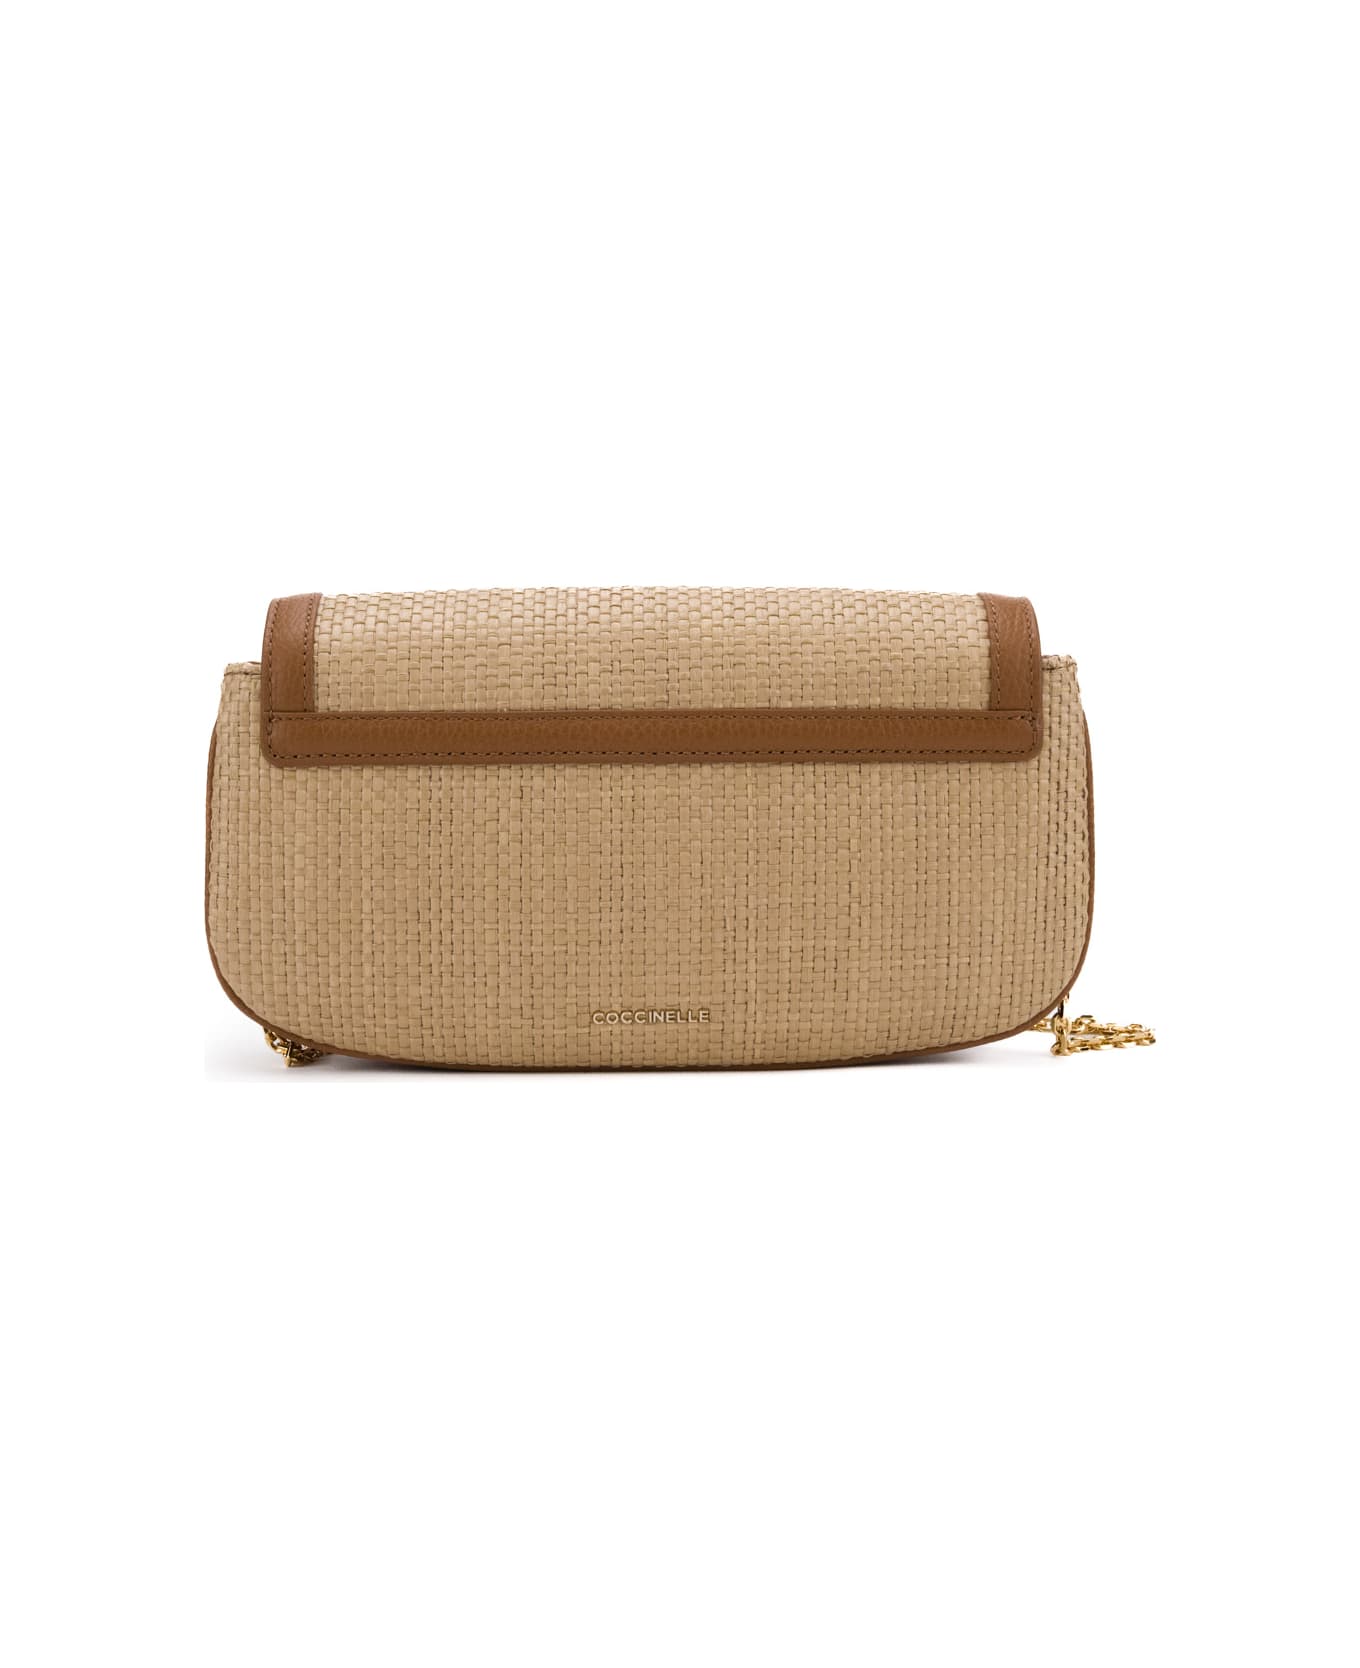 Coccinelle Raffia And Leather Bag - Natural/cuir